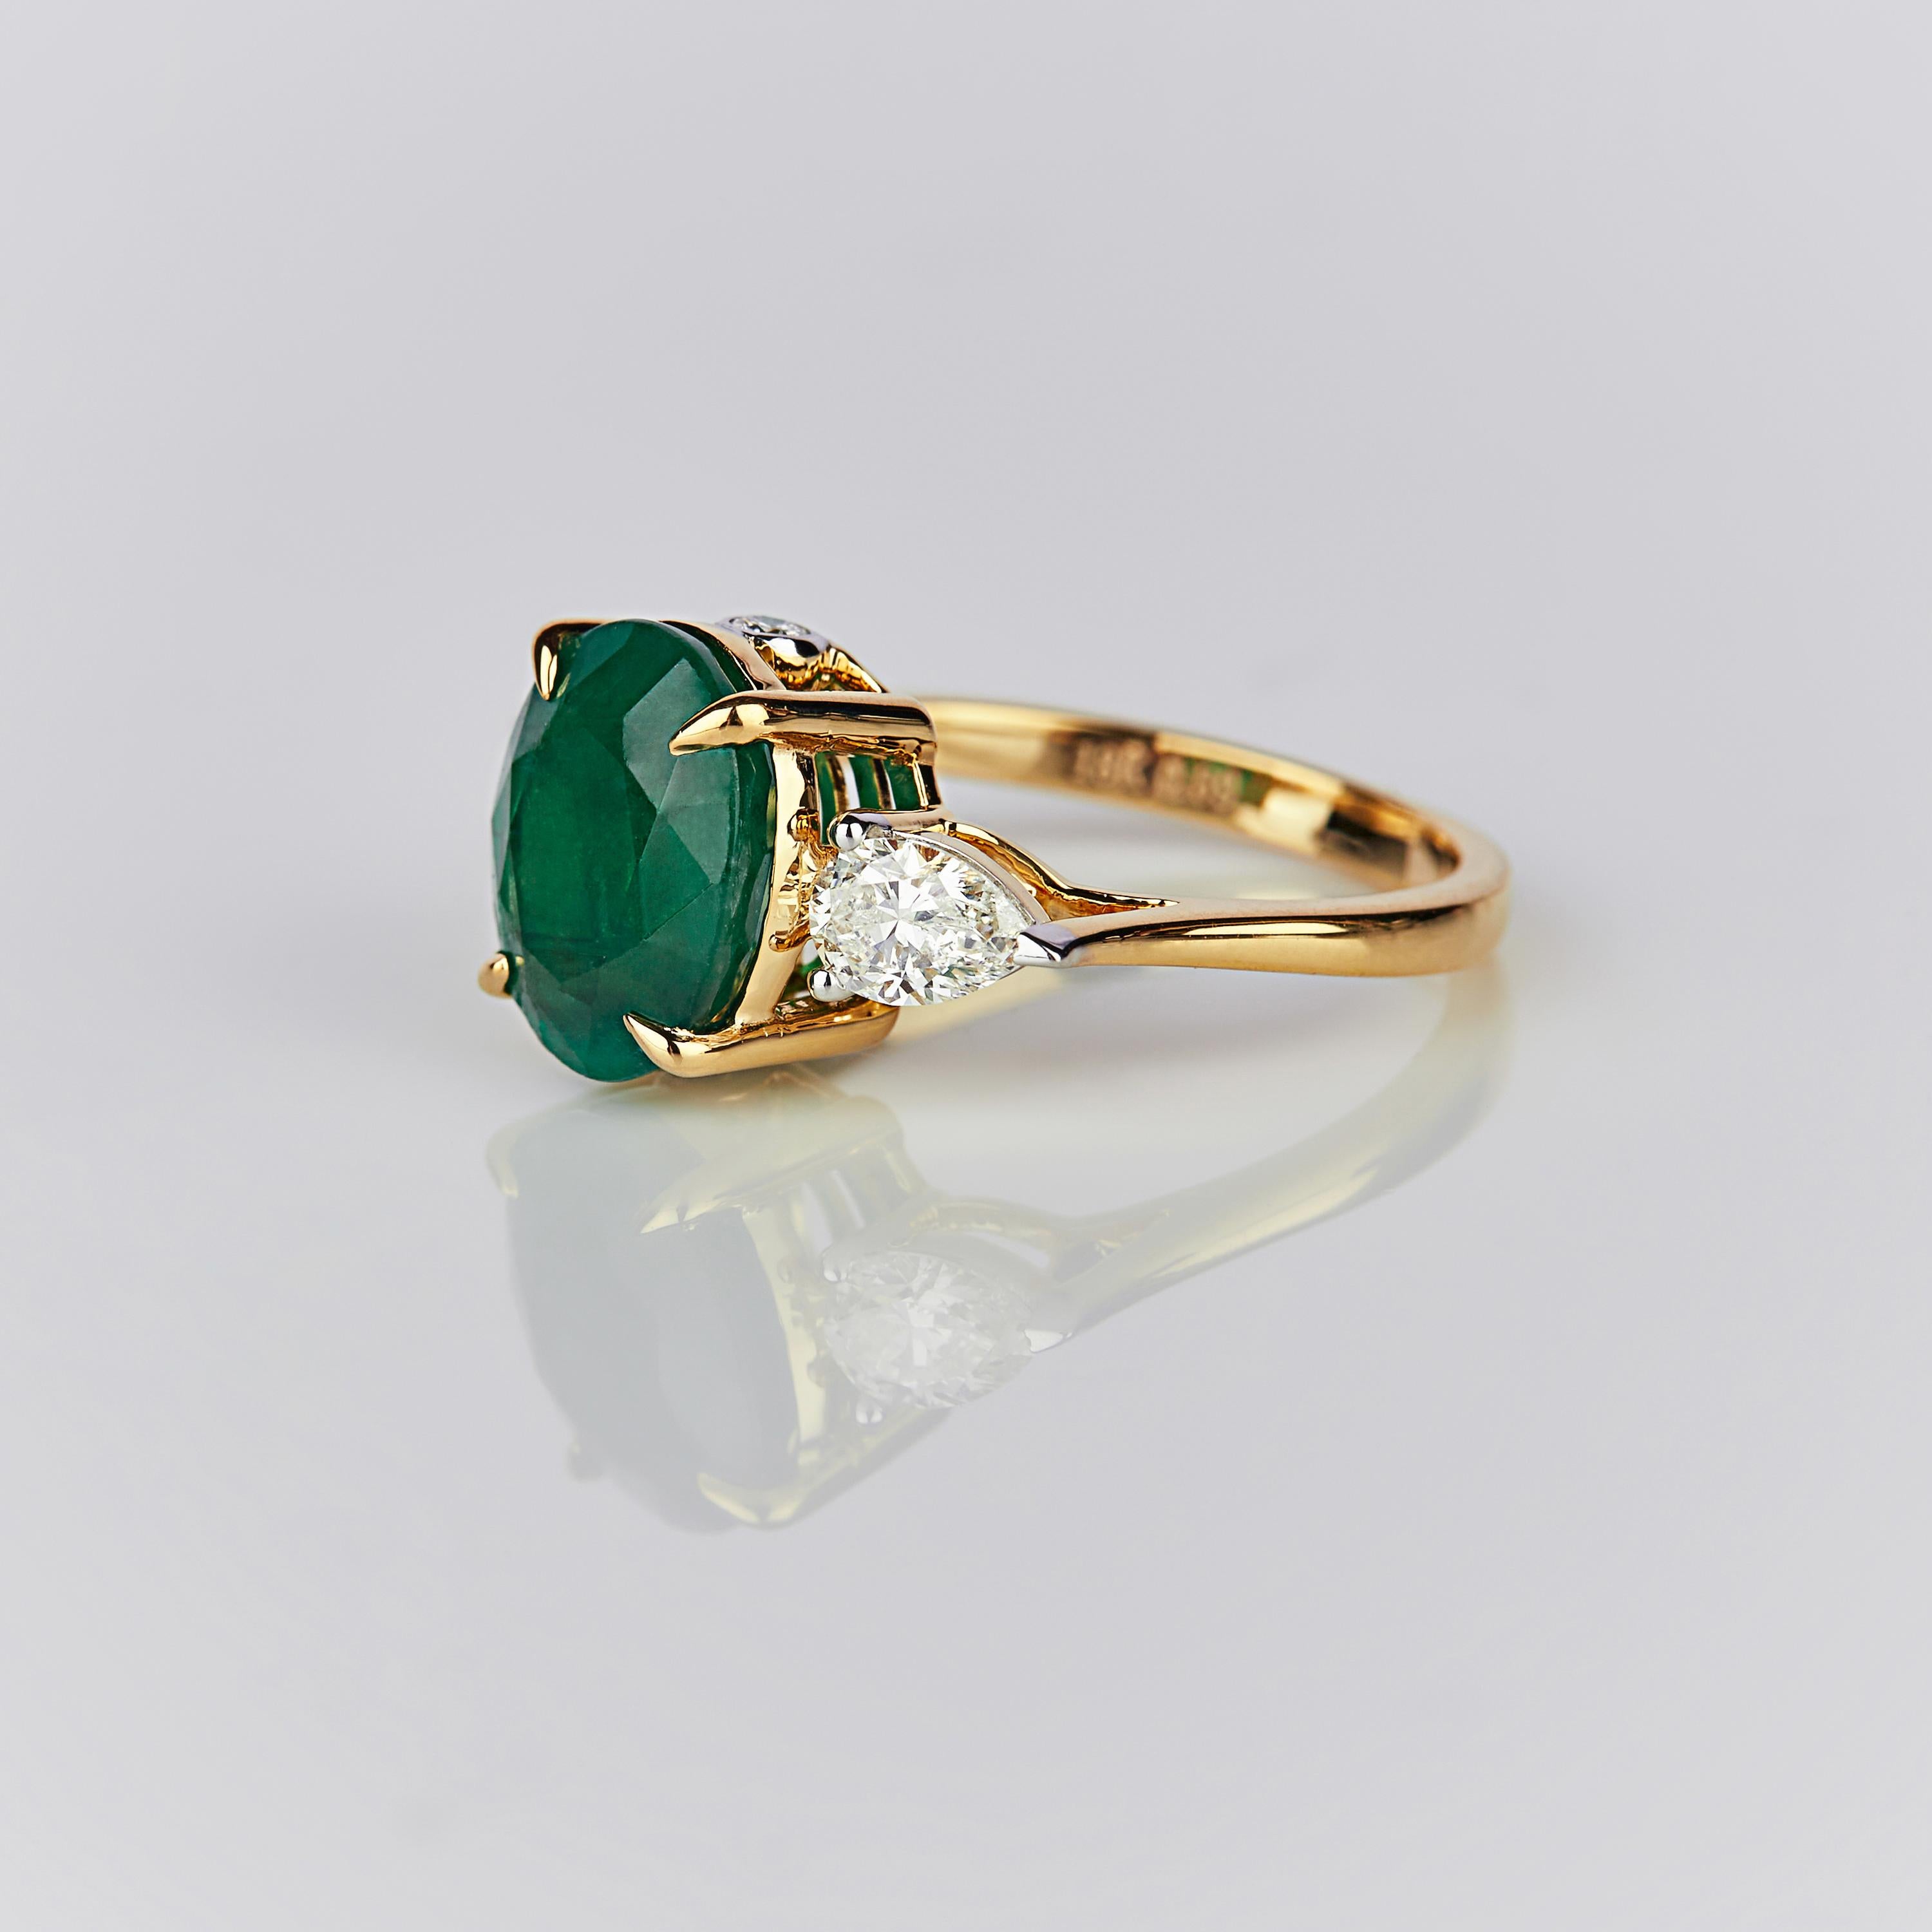 This Ring is set in 4.72 grams of White Gold surrounded by Pear cut and Round cut diamonds VS/G quality and color weighing 0.69 carats and Oval cut Emerald in the center of 3.33 carats.

Should this ring pique your interest, do check out our